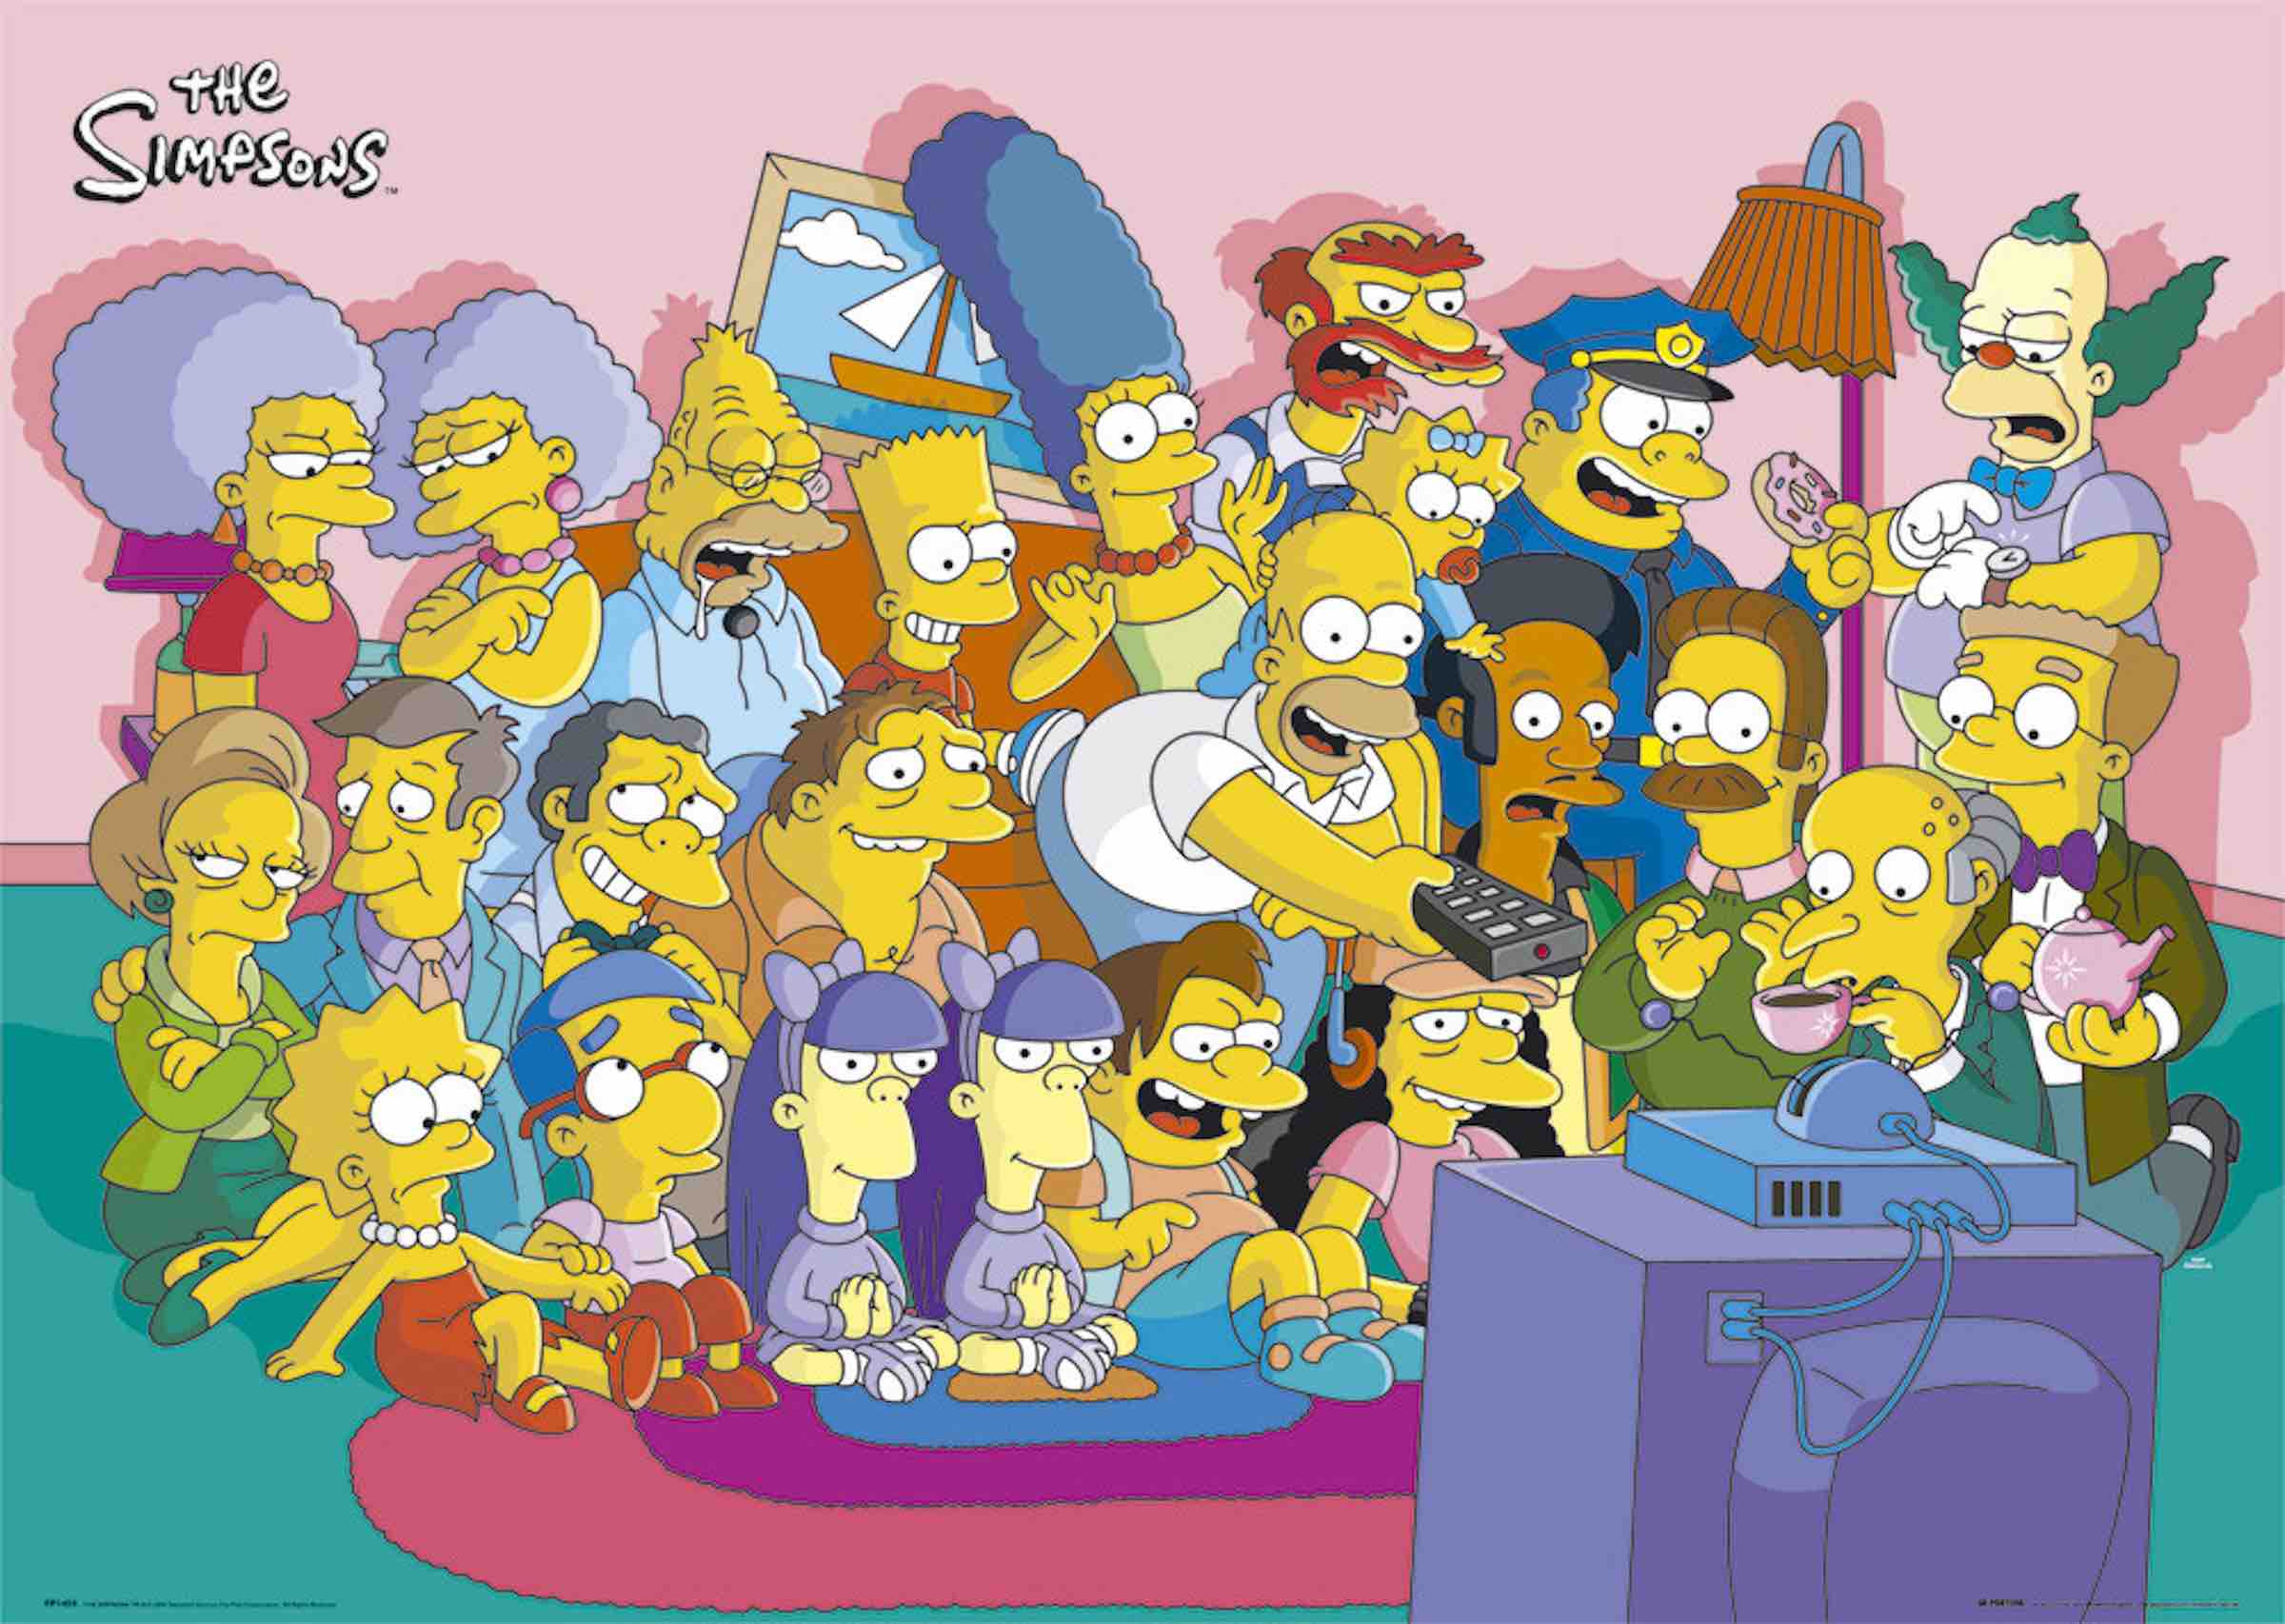 Prove your love of 'The Simpsons' and take our quiz. We’ll all go out for some Champagne Squishees if you get a perfect score.